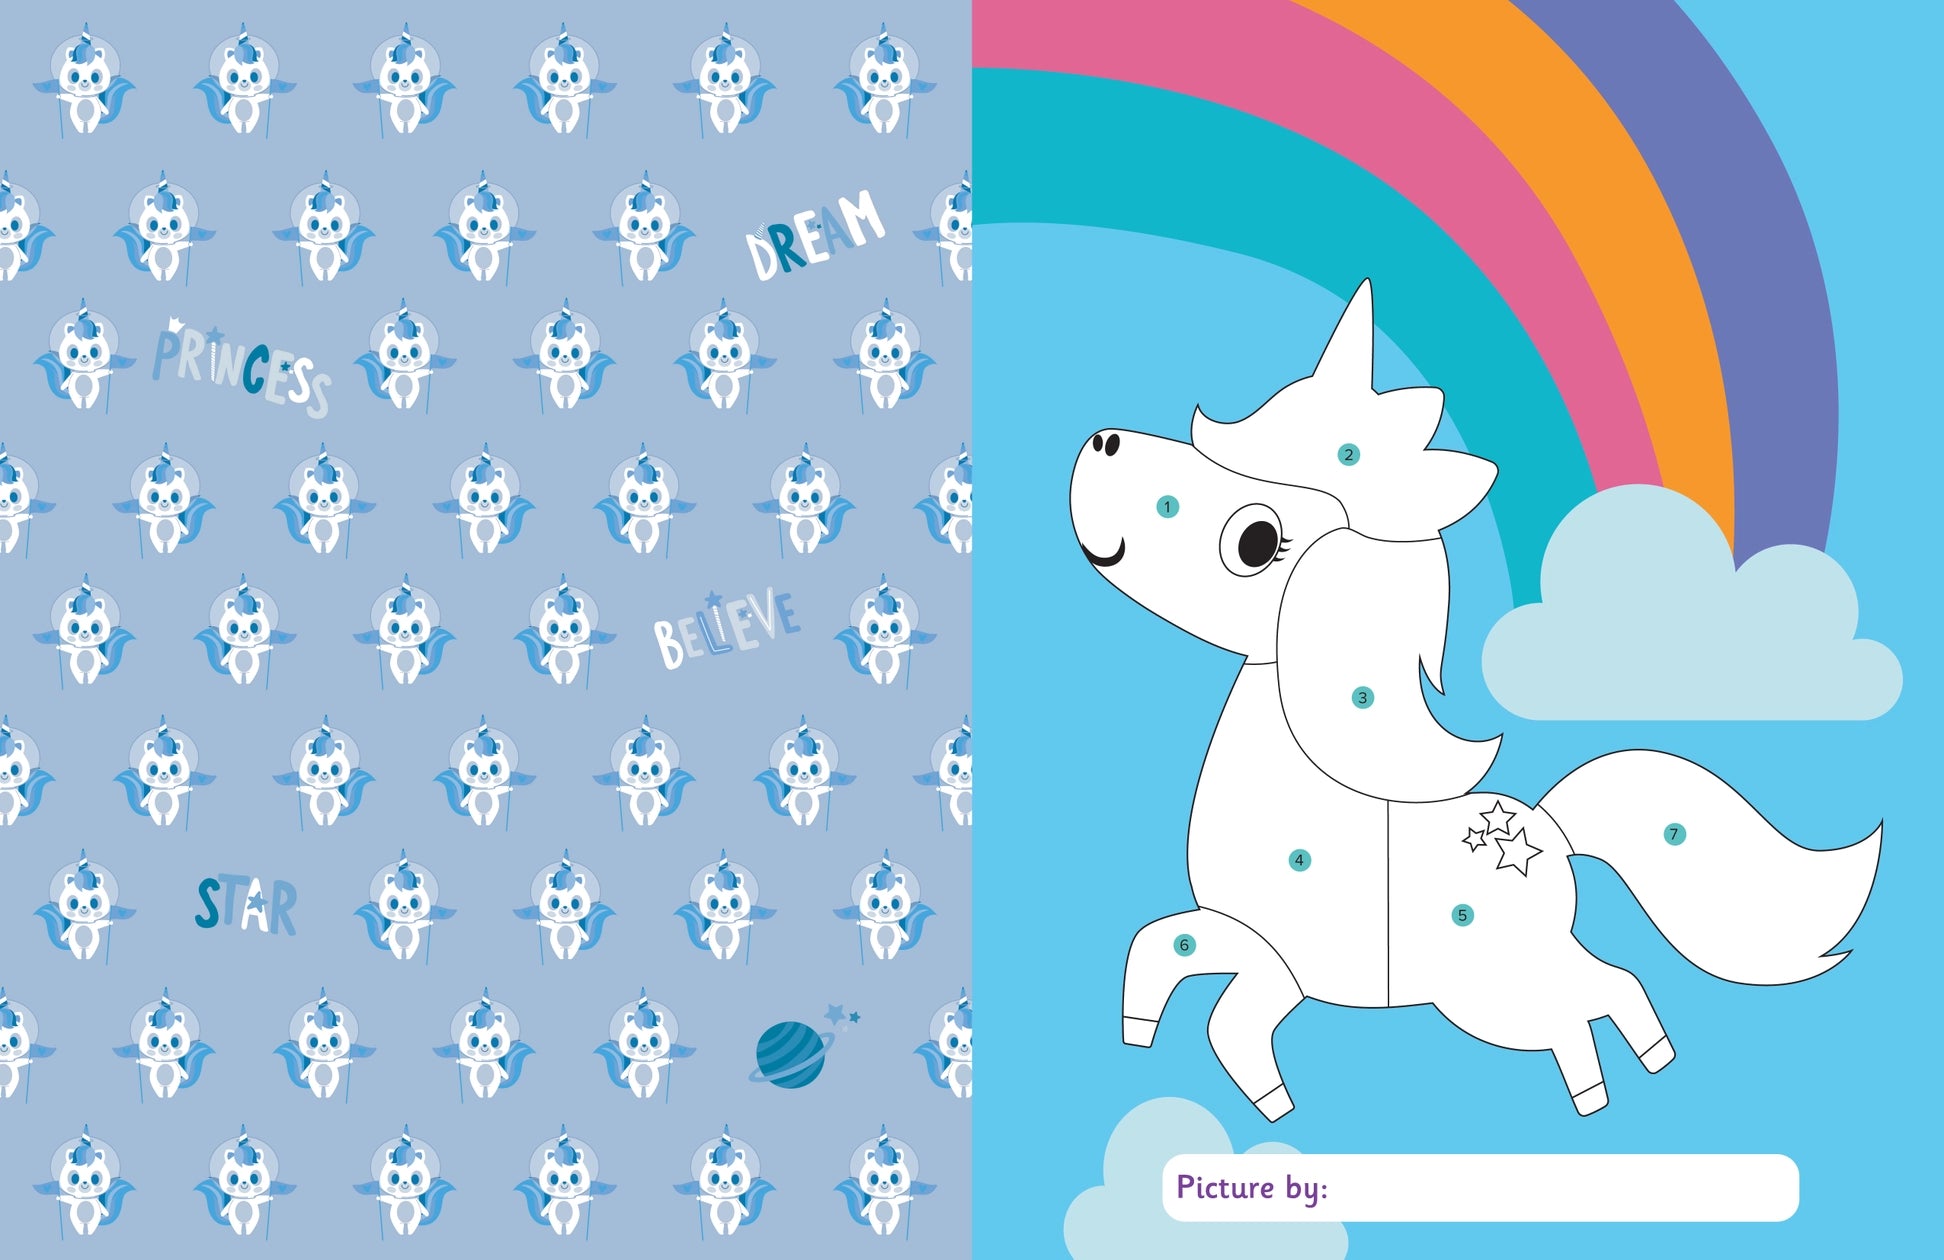 My First Sticker By Numbers: Magical Creatures Book  - Doodlebug's Children's Boutique